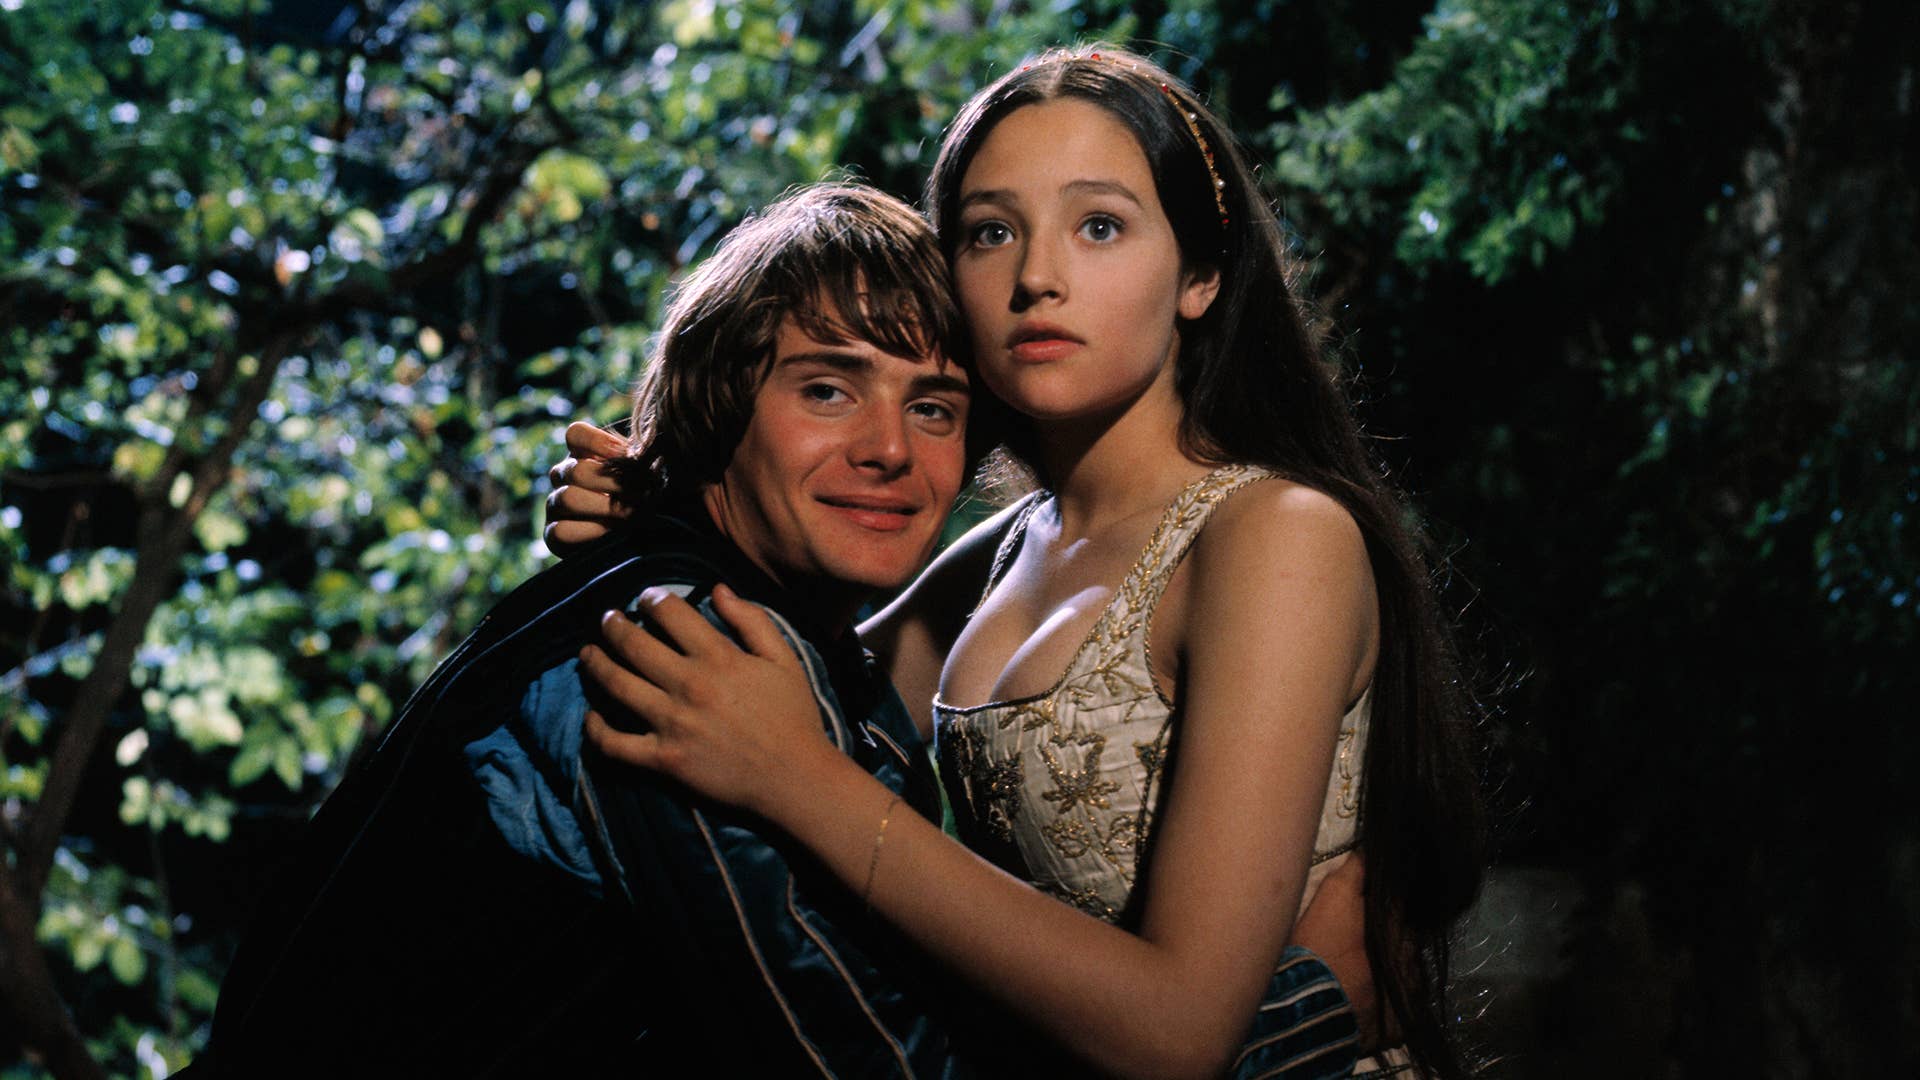 Leonard Whiting plays Romeo Montague and Olivia Hussey plays Juliet Capulet in the 1968 production of Shakespeare's Romeo and Juliet